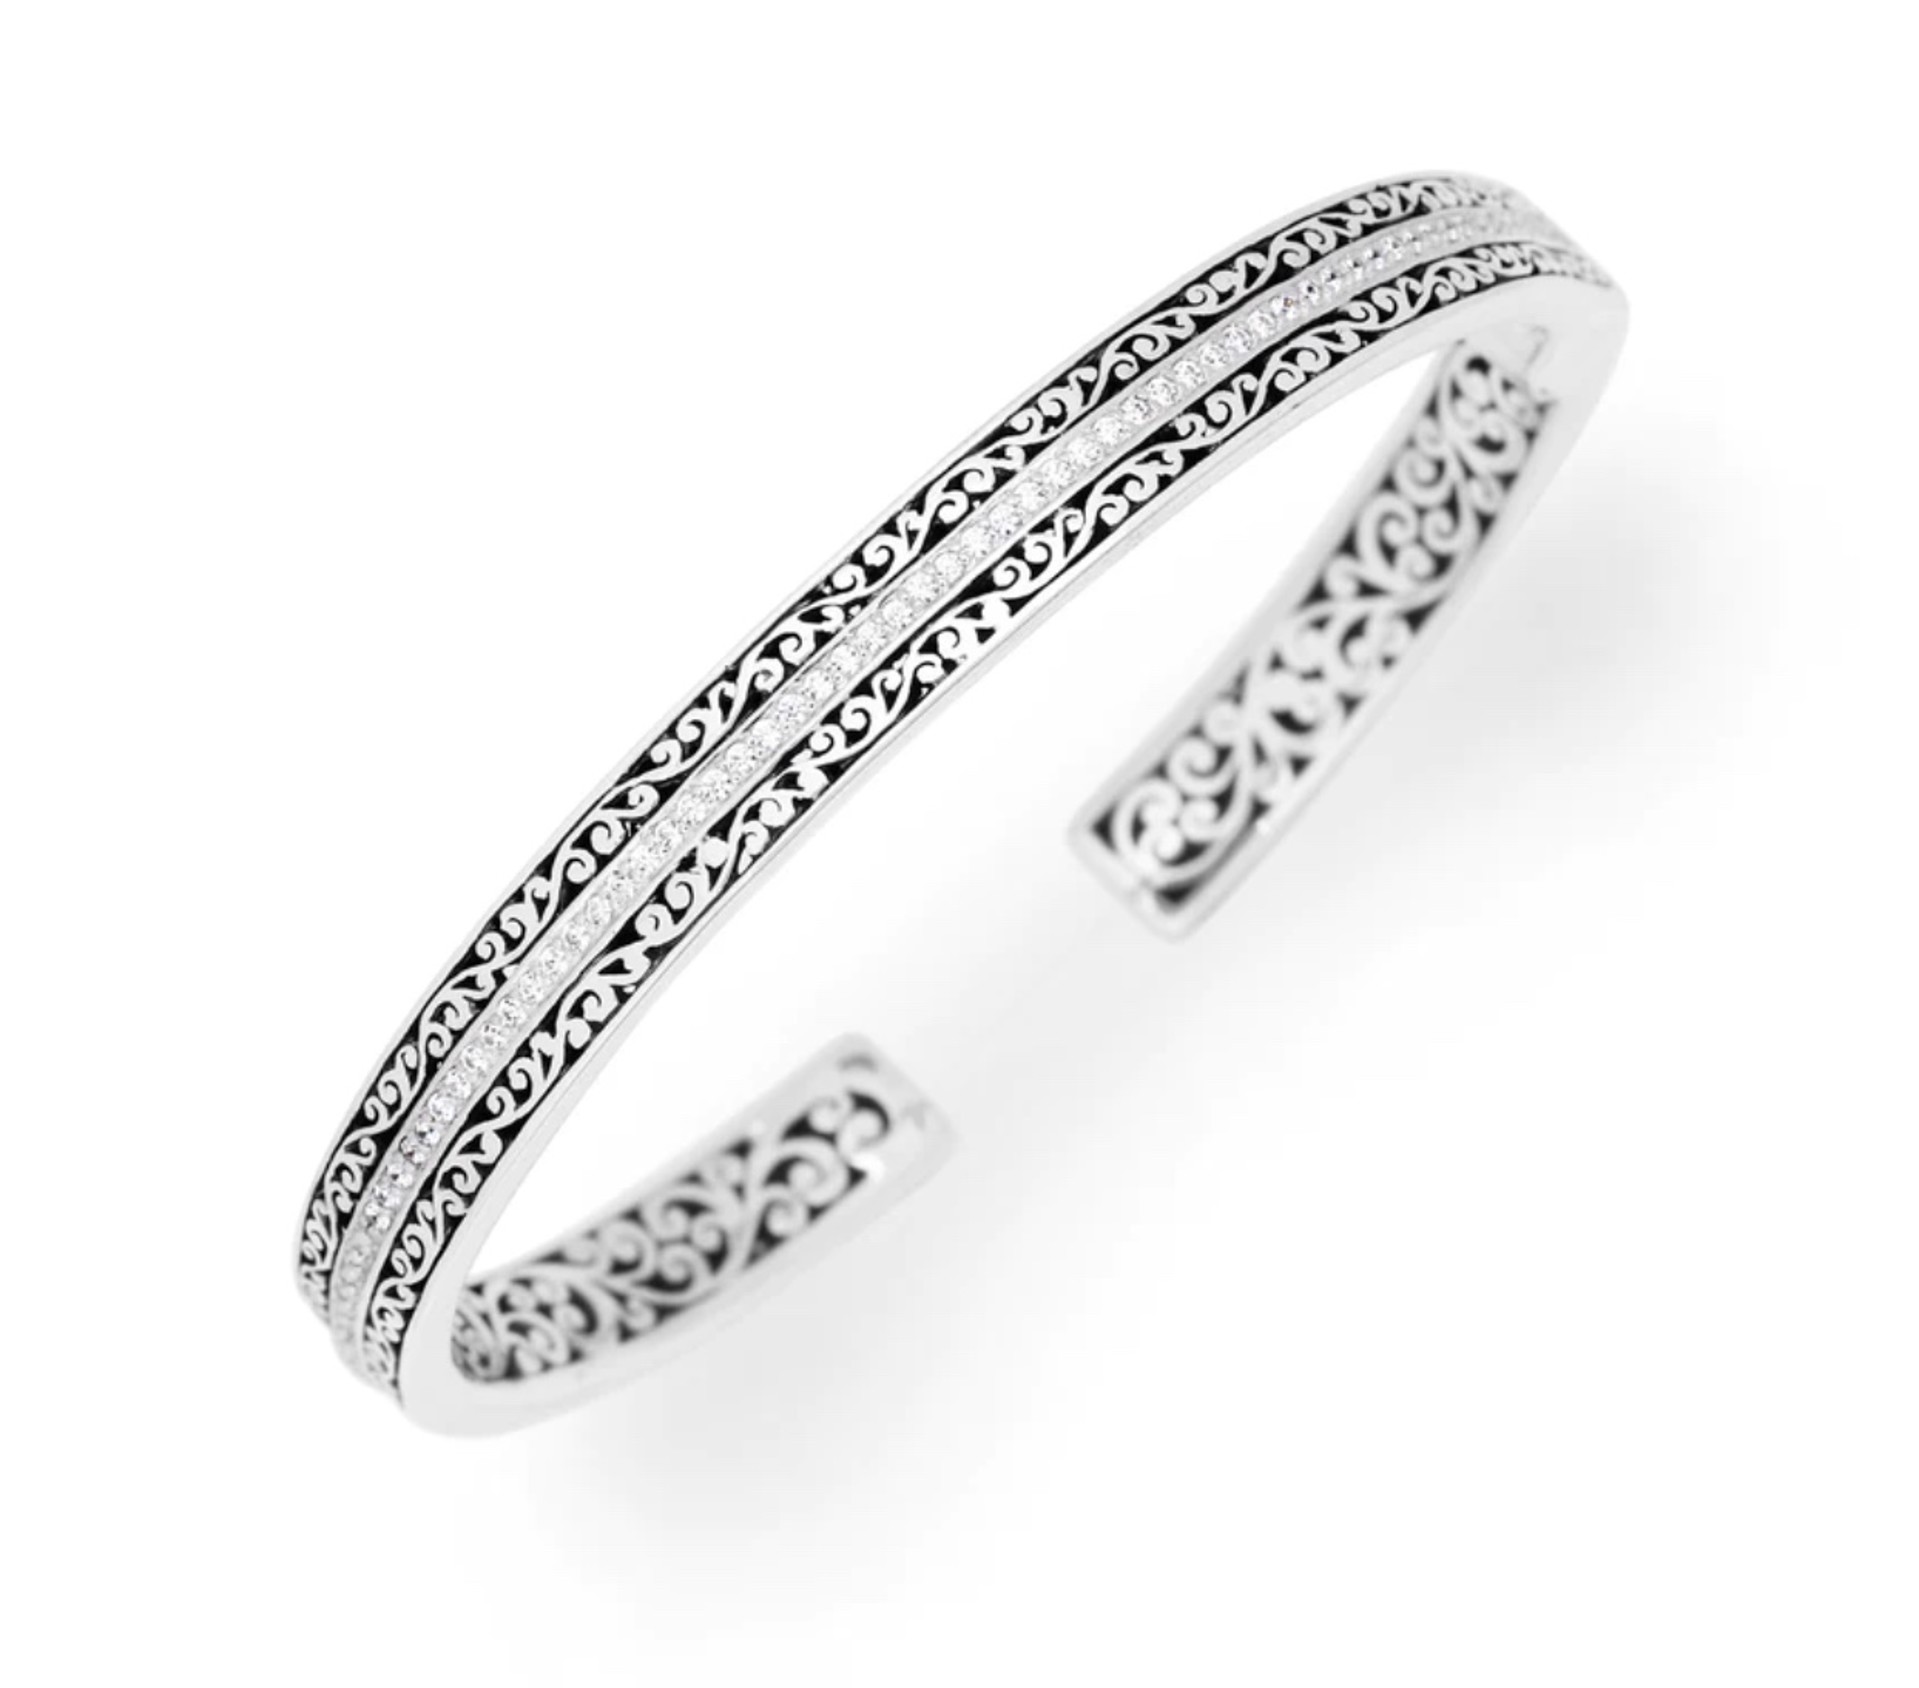 7038 Diamond (0.30 CT) Center Line with Classic Signature Lois Hill Scroll Hinged Cuff (7mm Wide) by Lois Hill